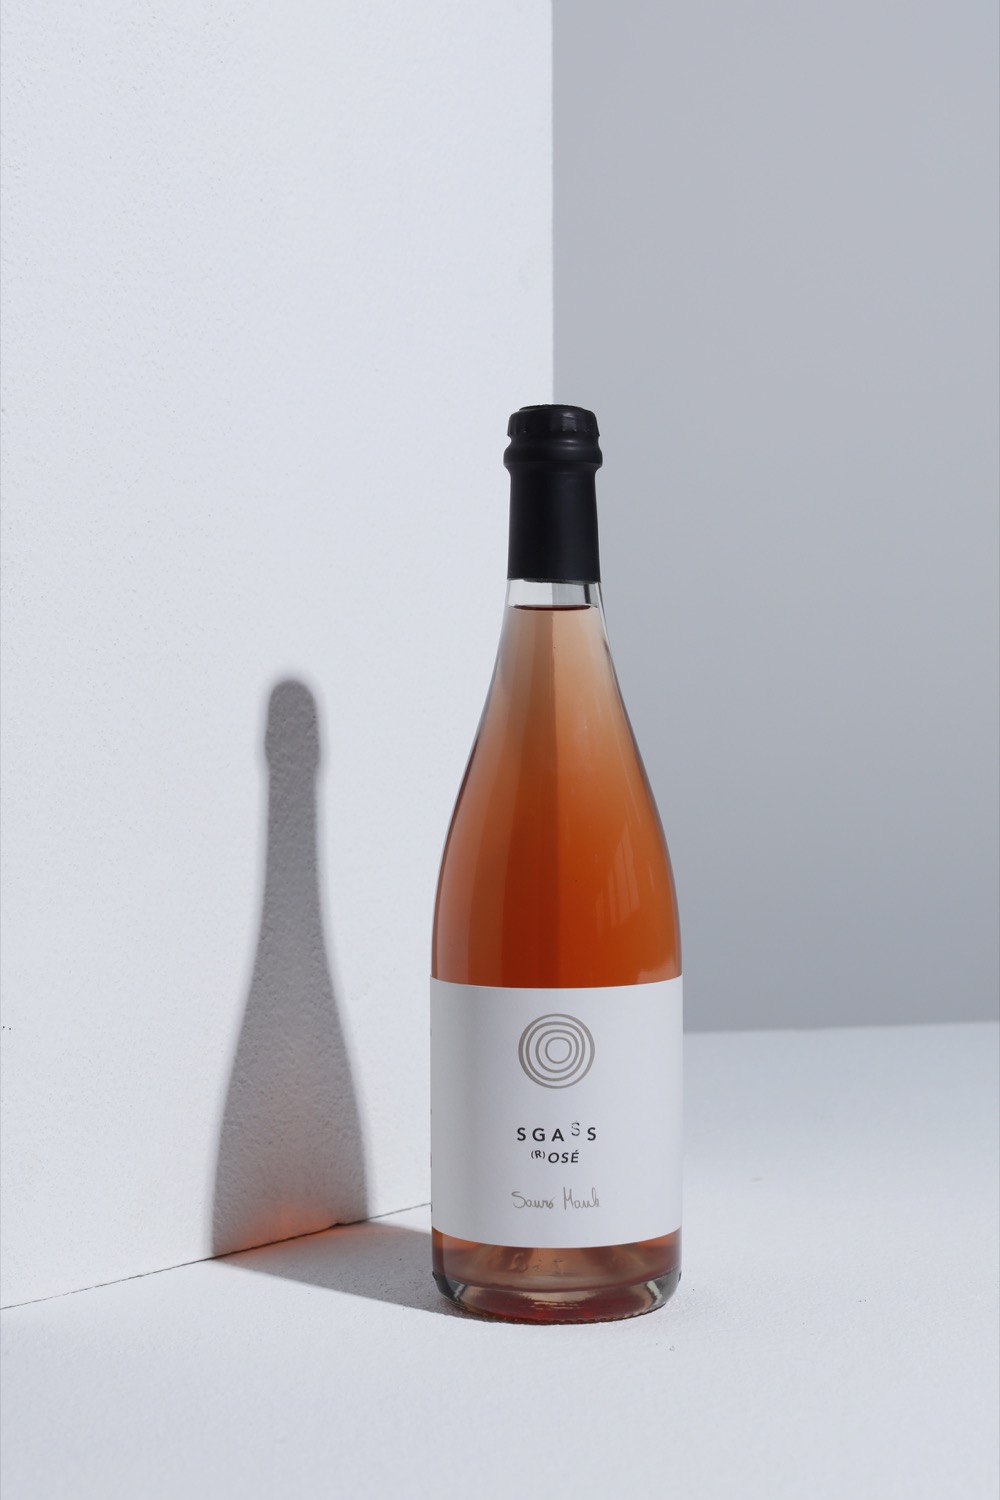 Sauro-Maule-wines-sgass-rose_DS_7326_p_1500